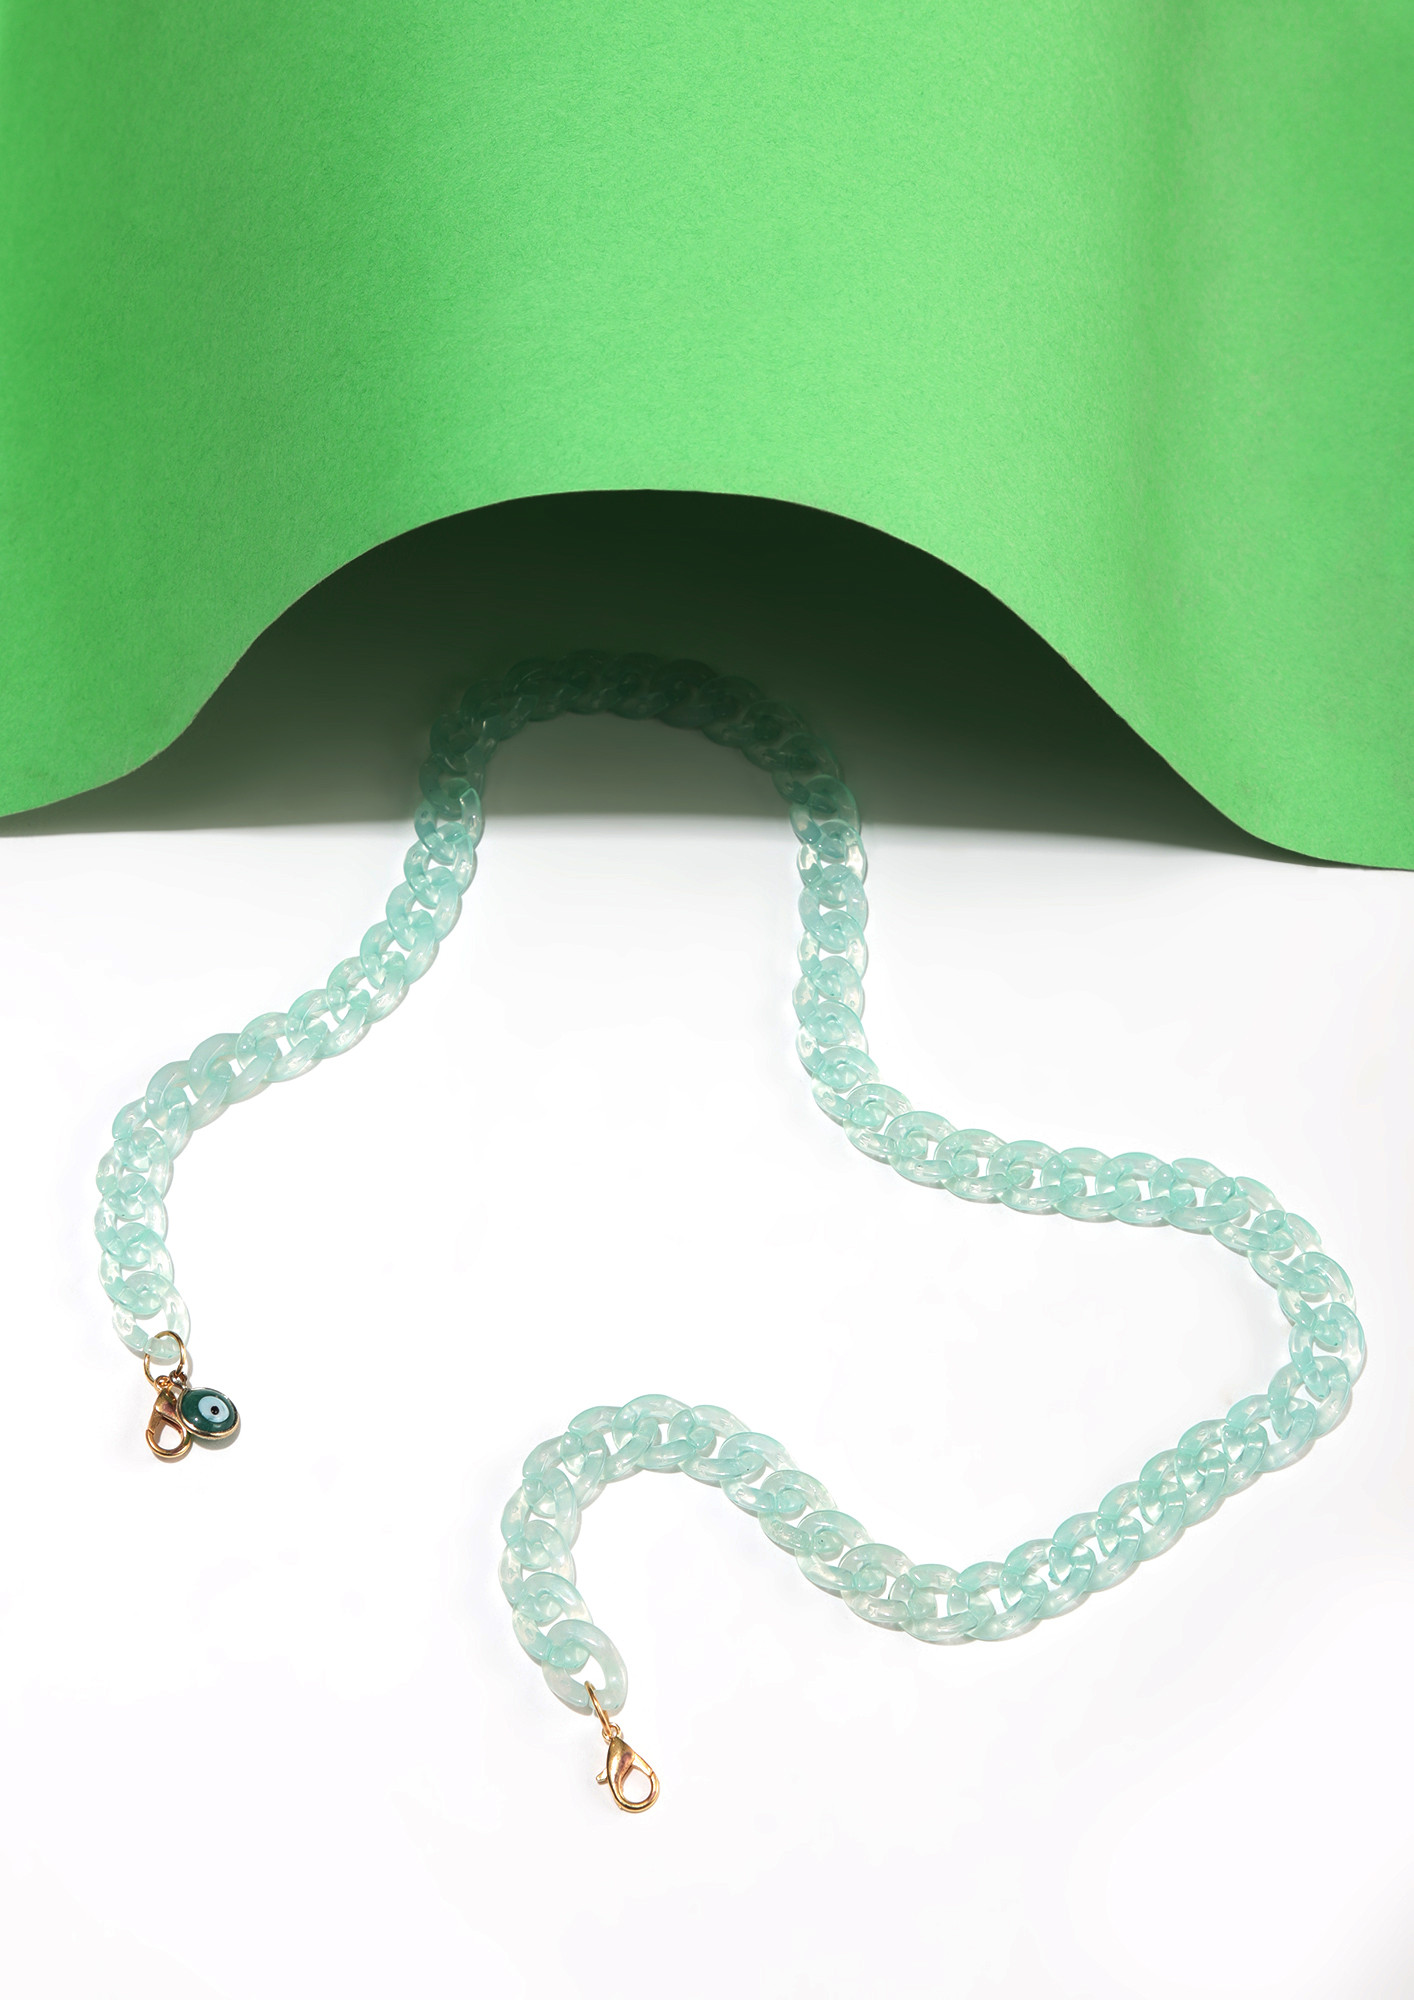 LIFT UP YOUR LOOKS LIGHT GREEN CHAIN